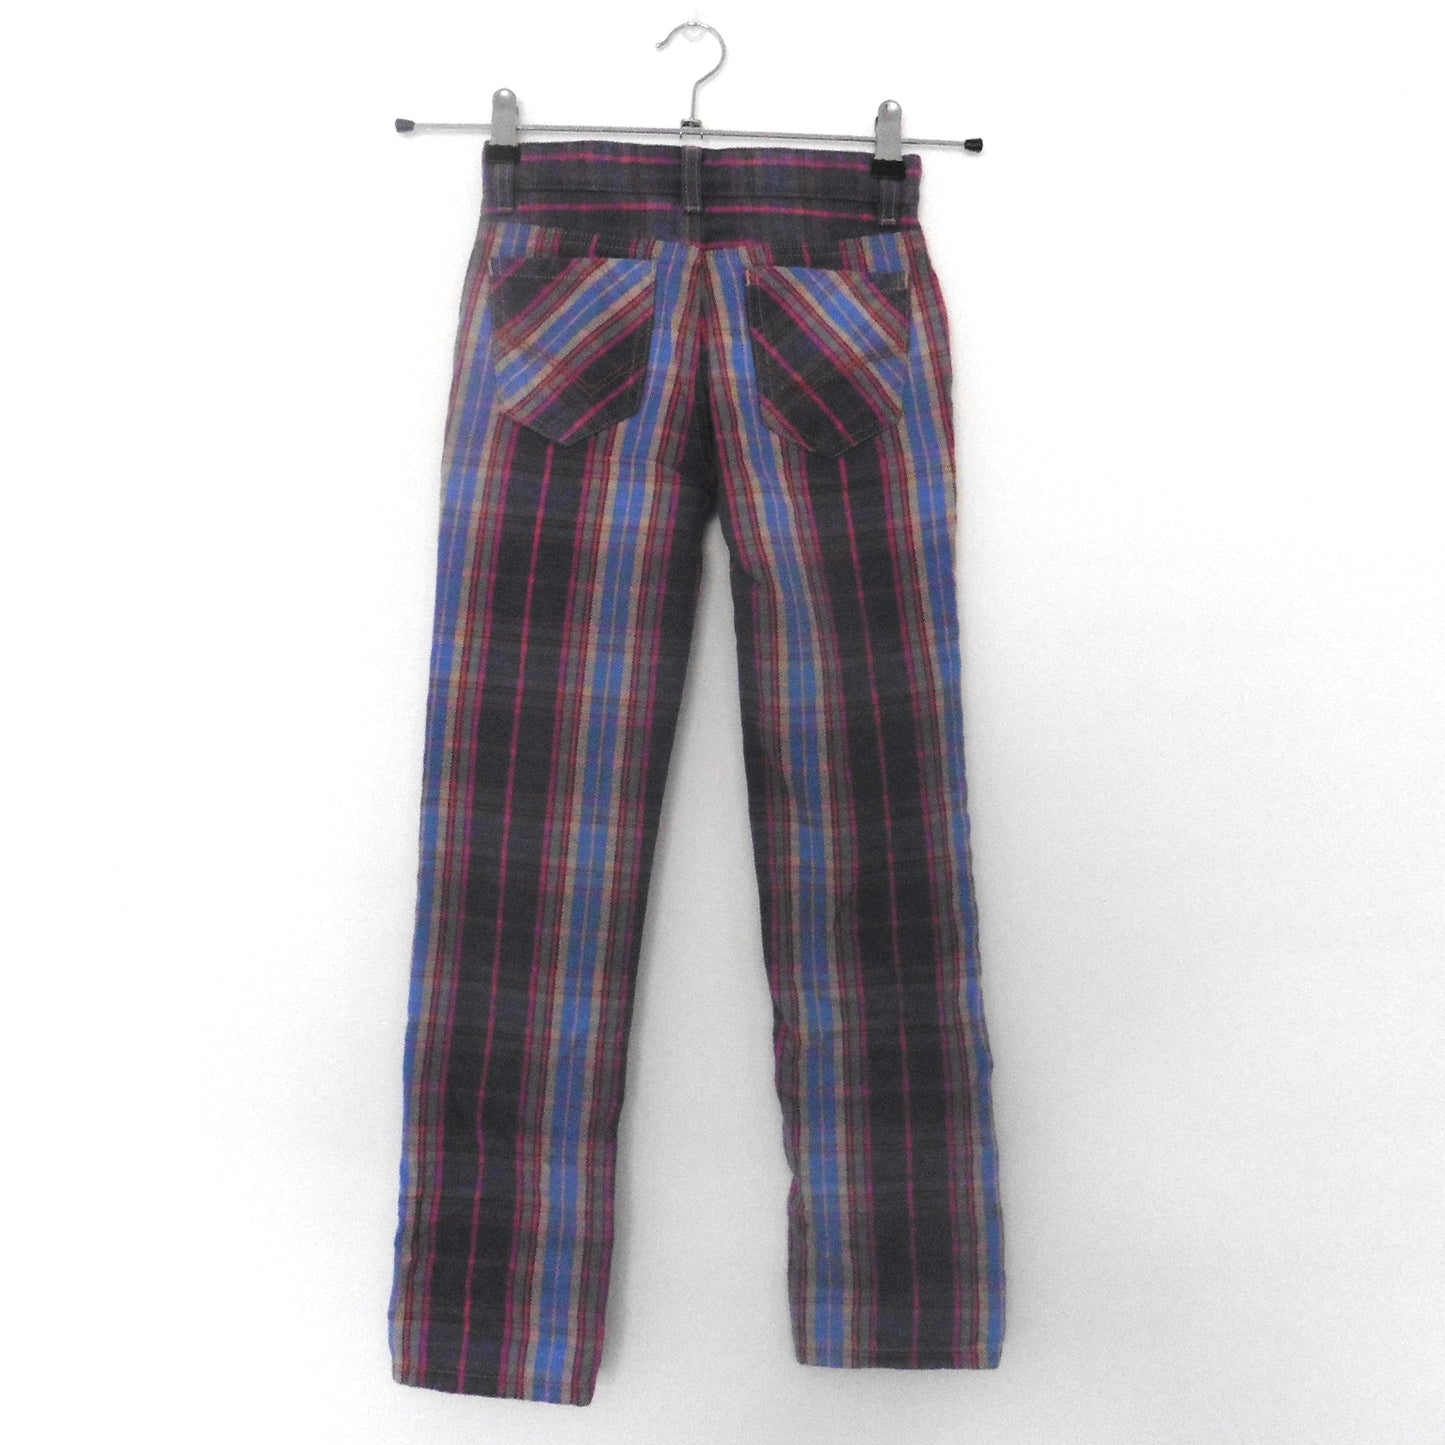 Boden chequer soft jeans 11-13y NEW